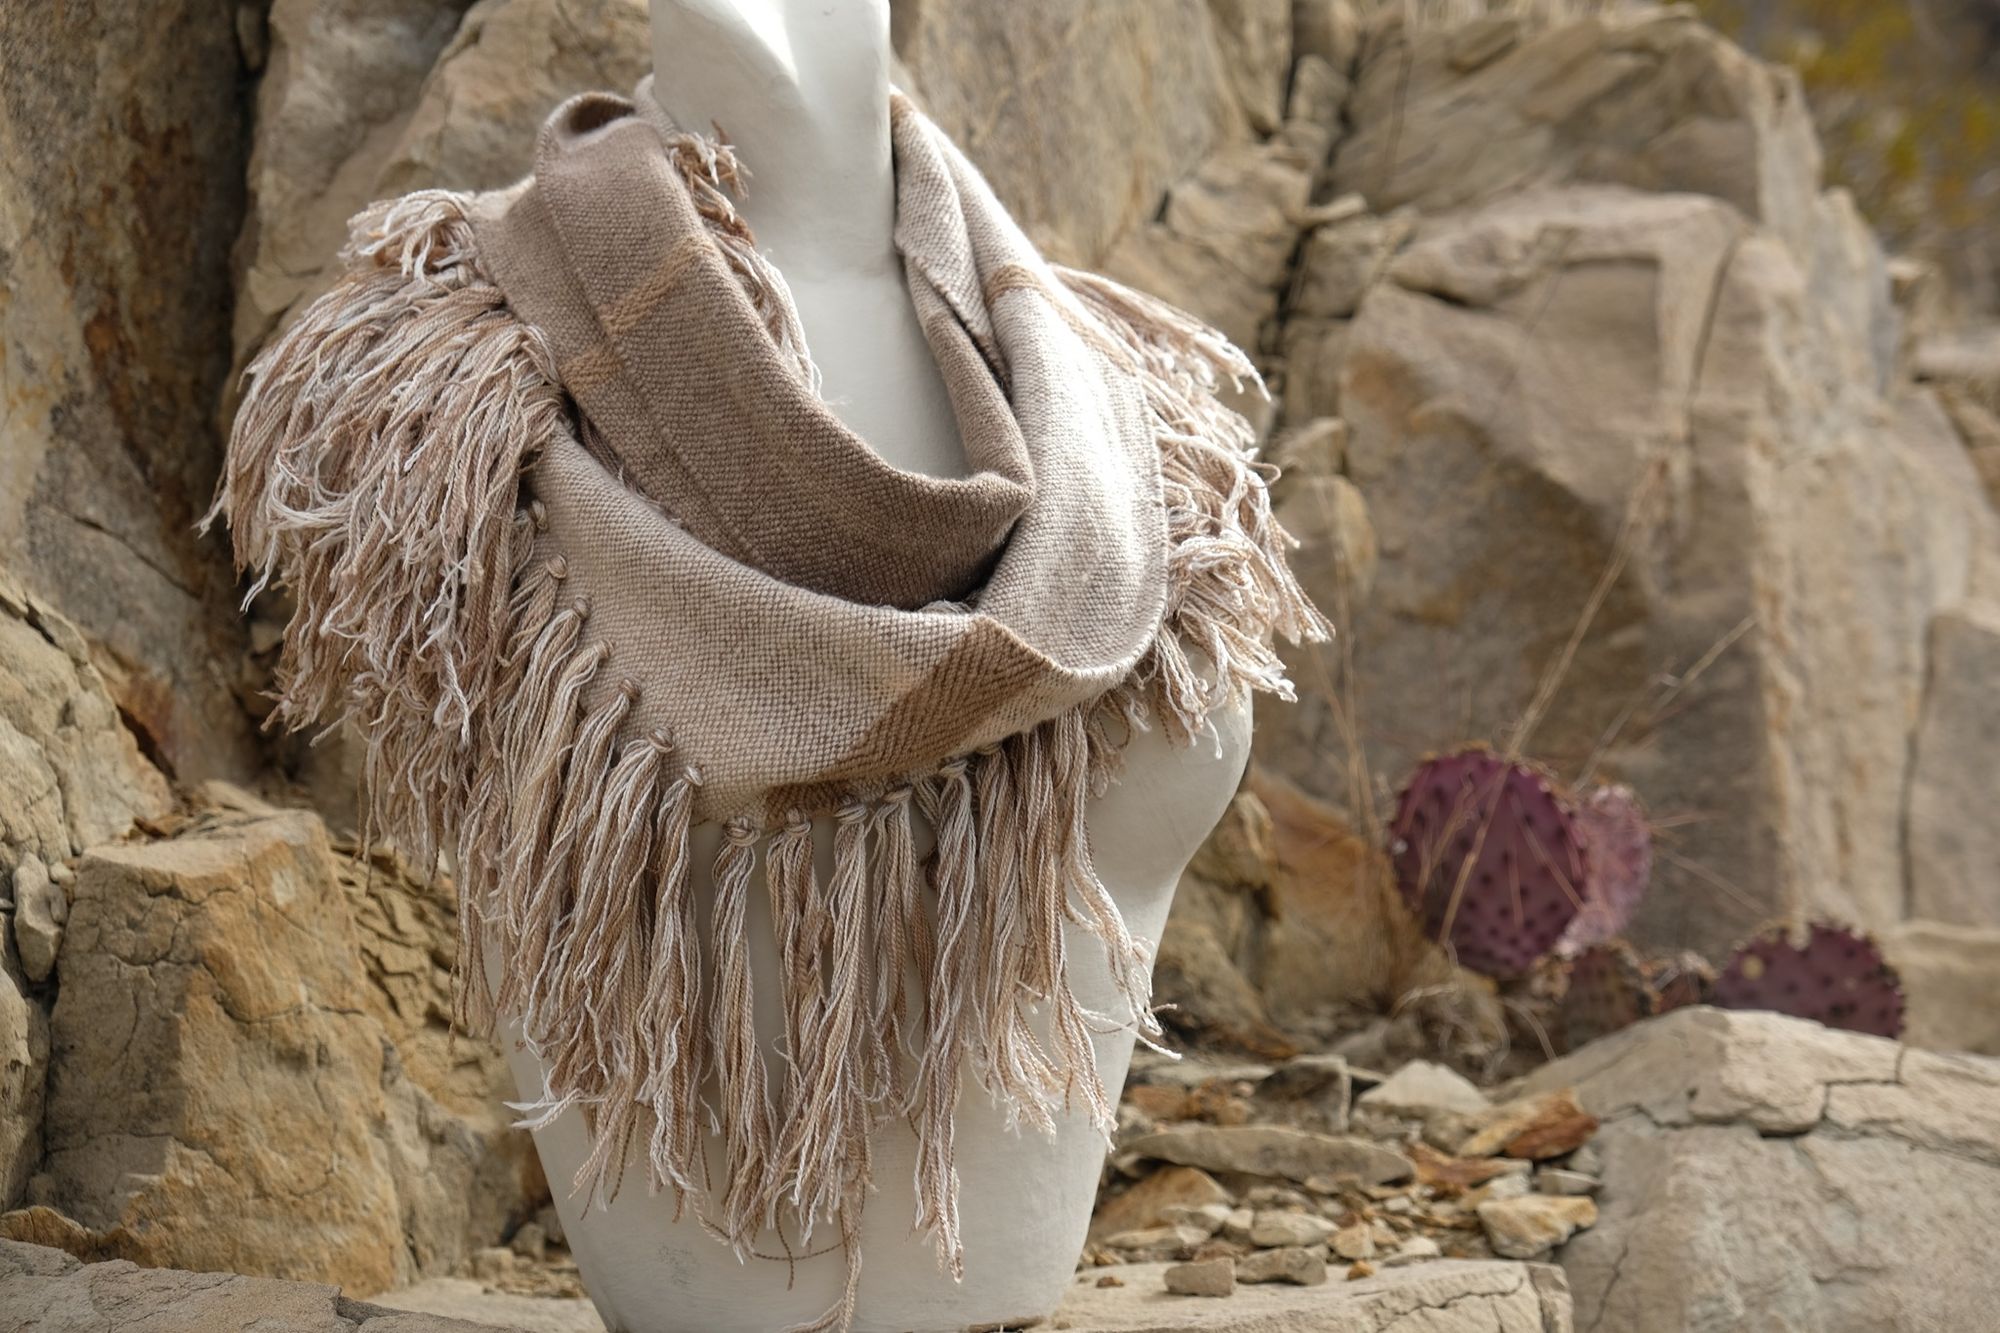  white and brown fringed infinity scarf on a white mannequin bust in the desert